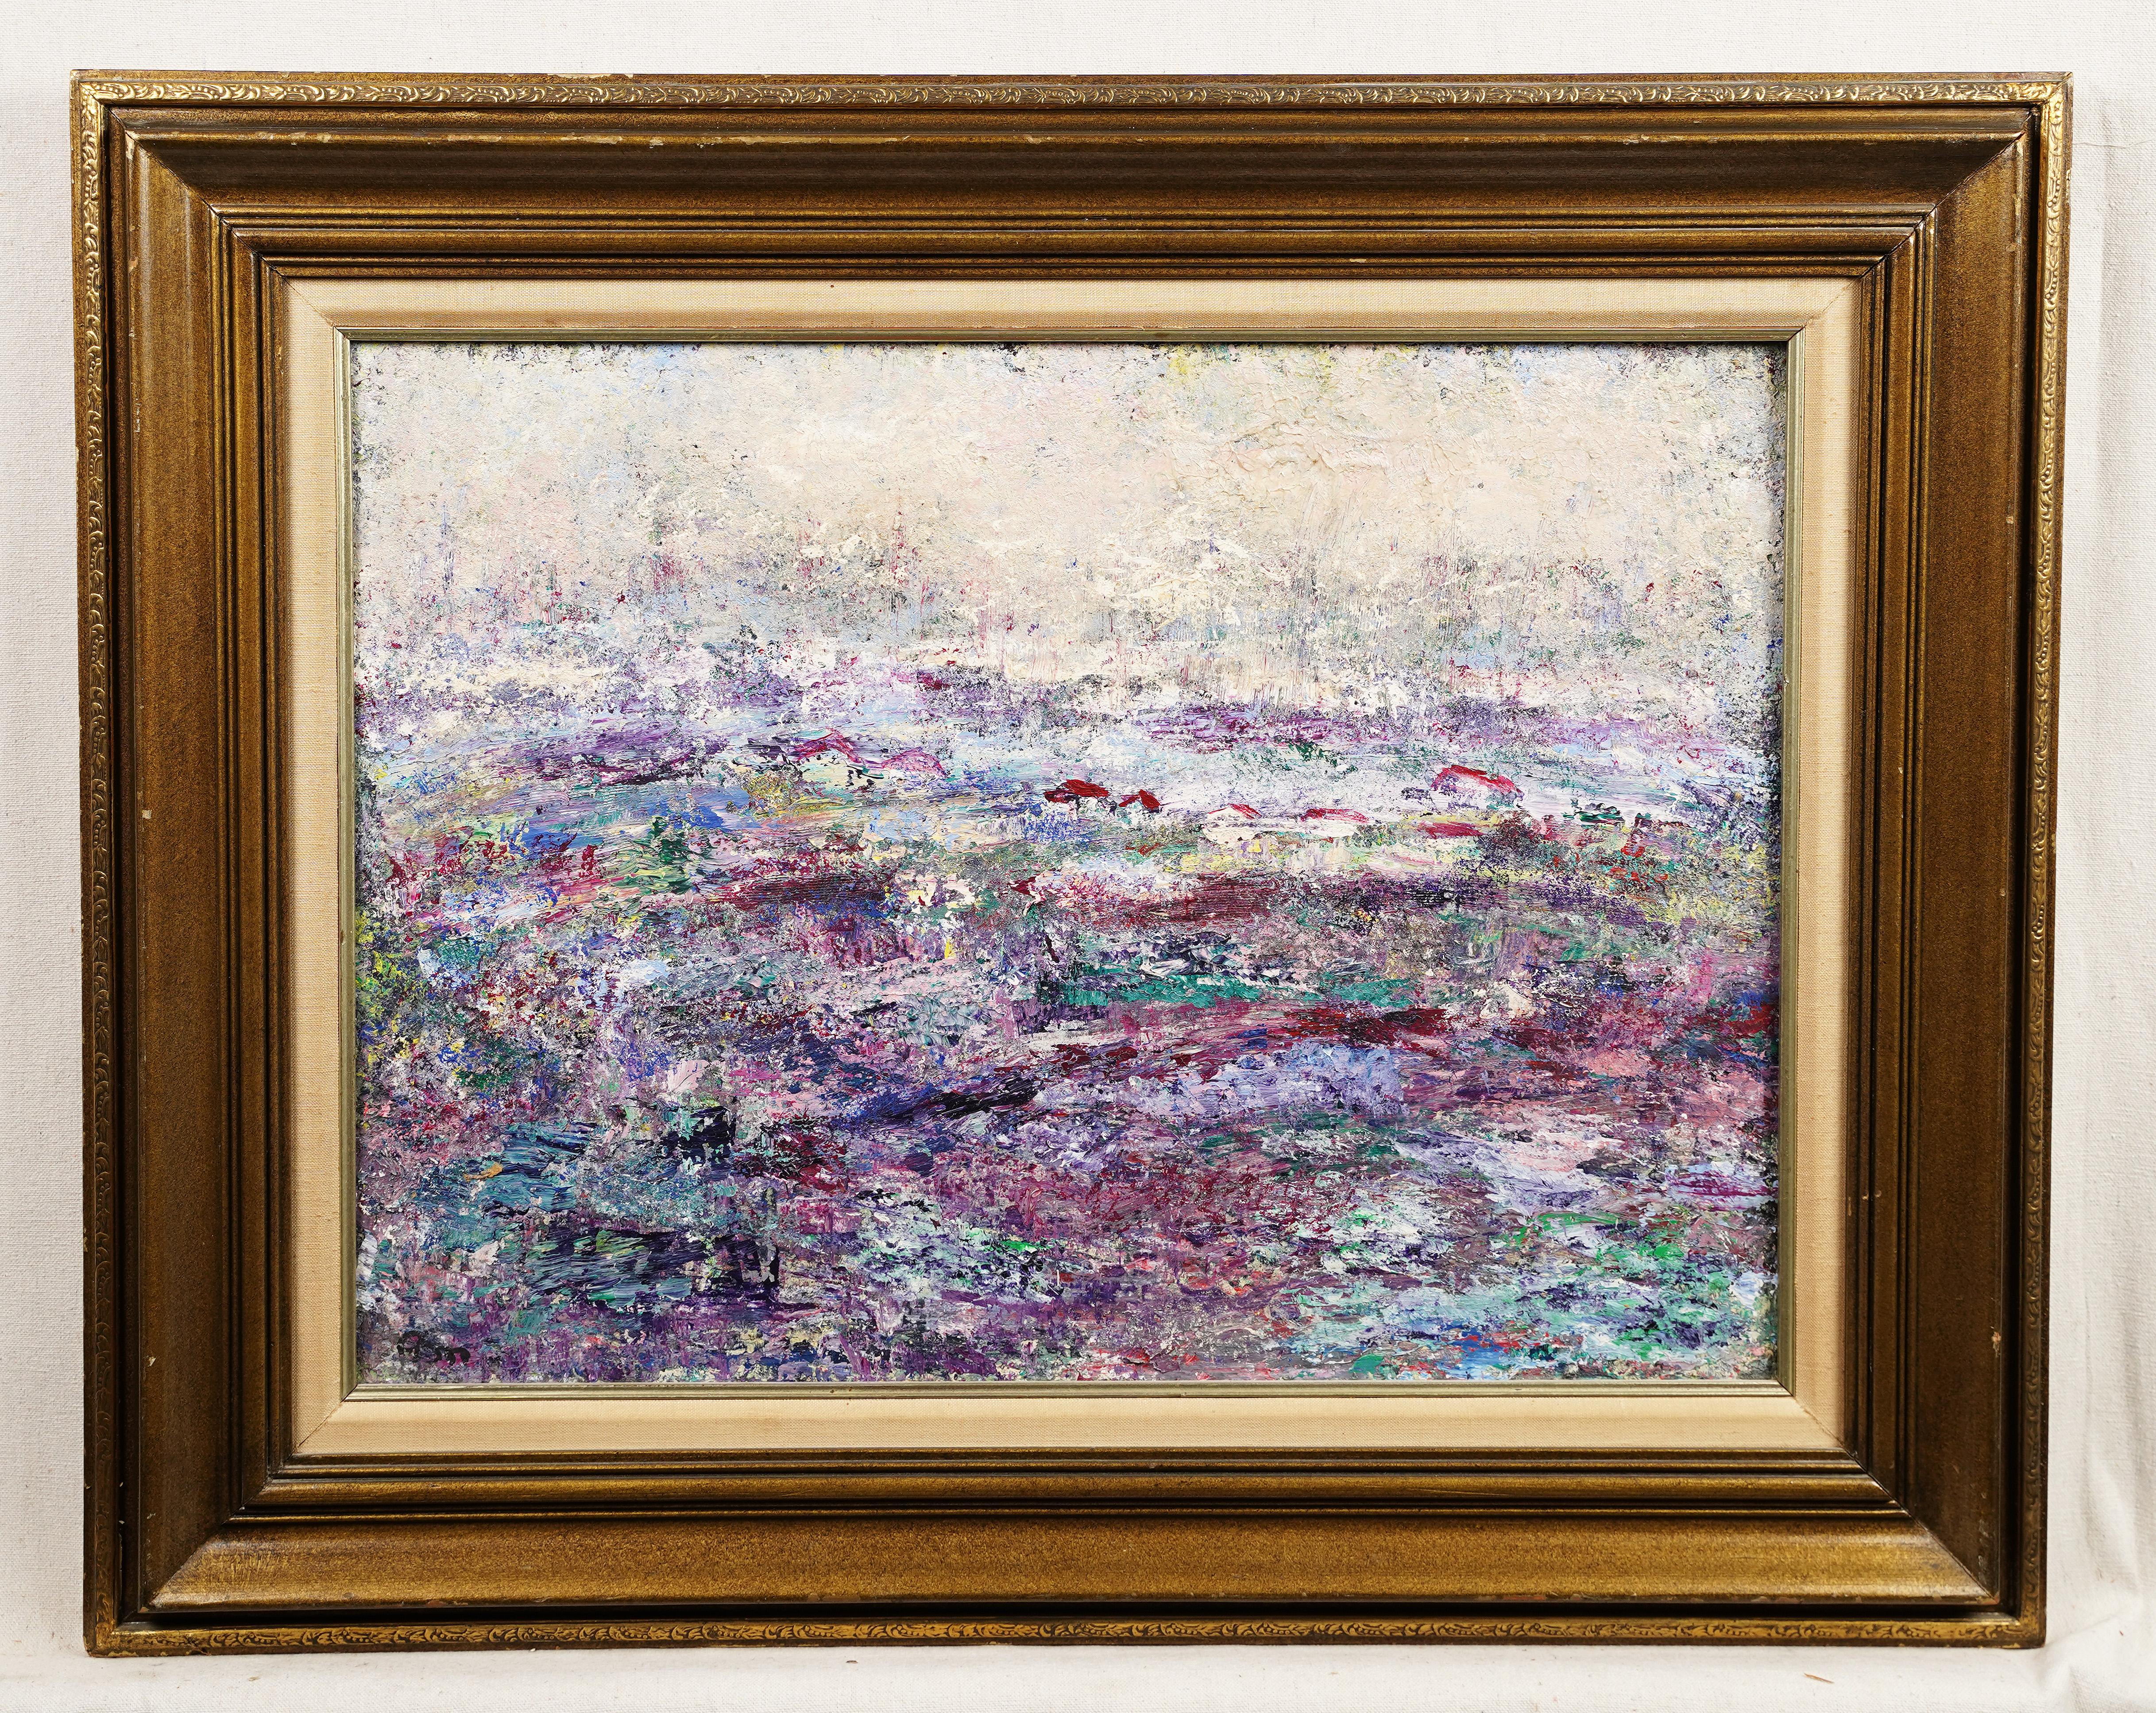 Vintage Modernist Abstract Flower Field European Town Landscape Framed Painting - Brown Landscape Painting by Unknown